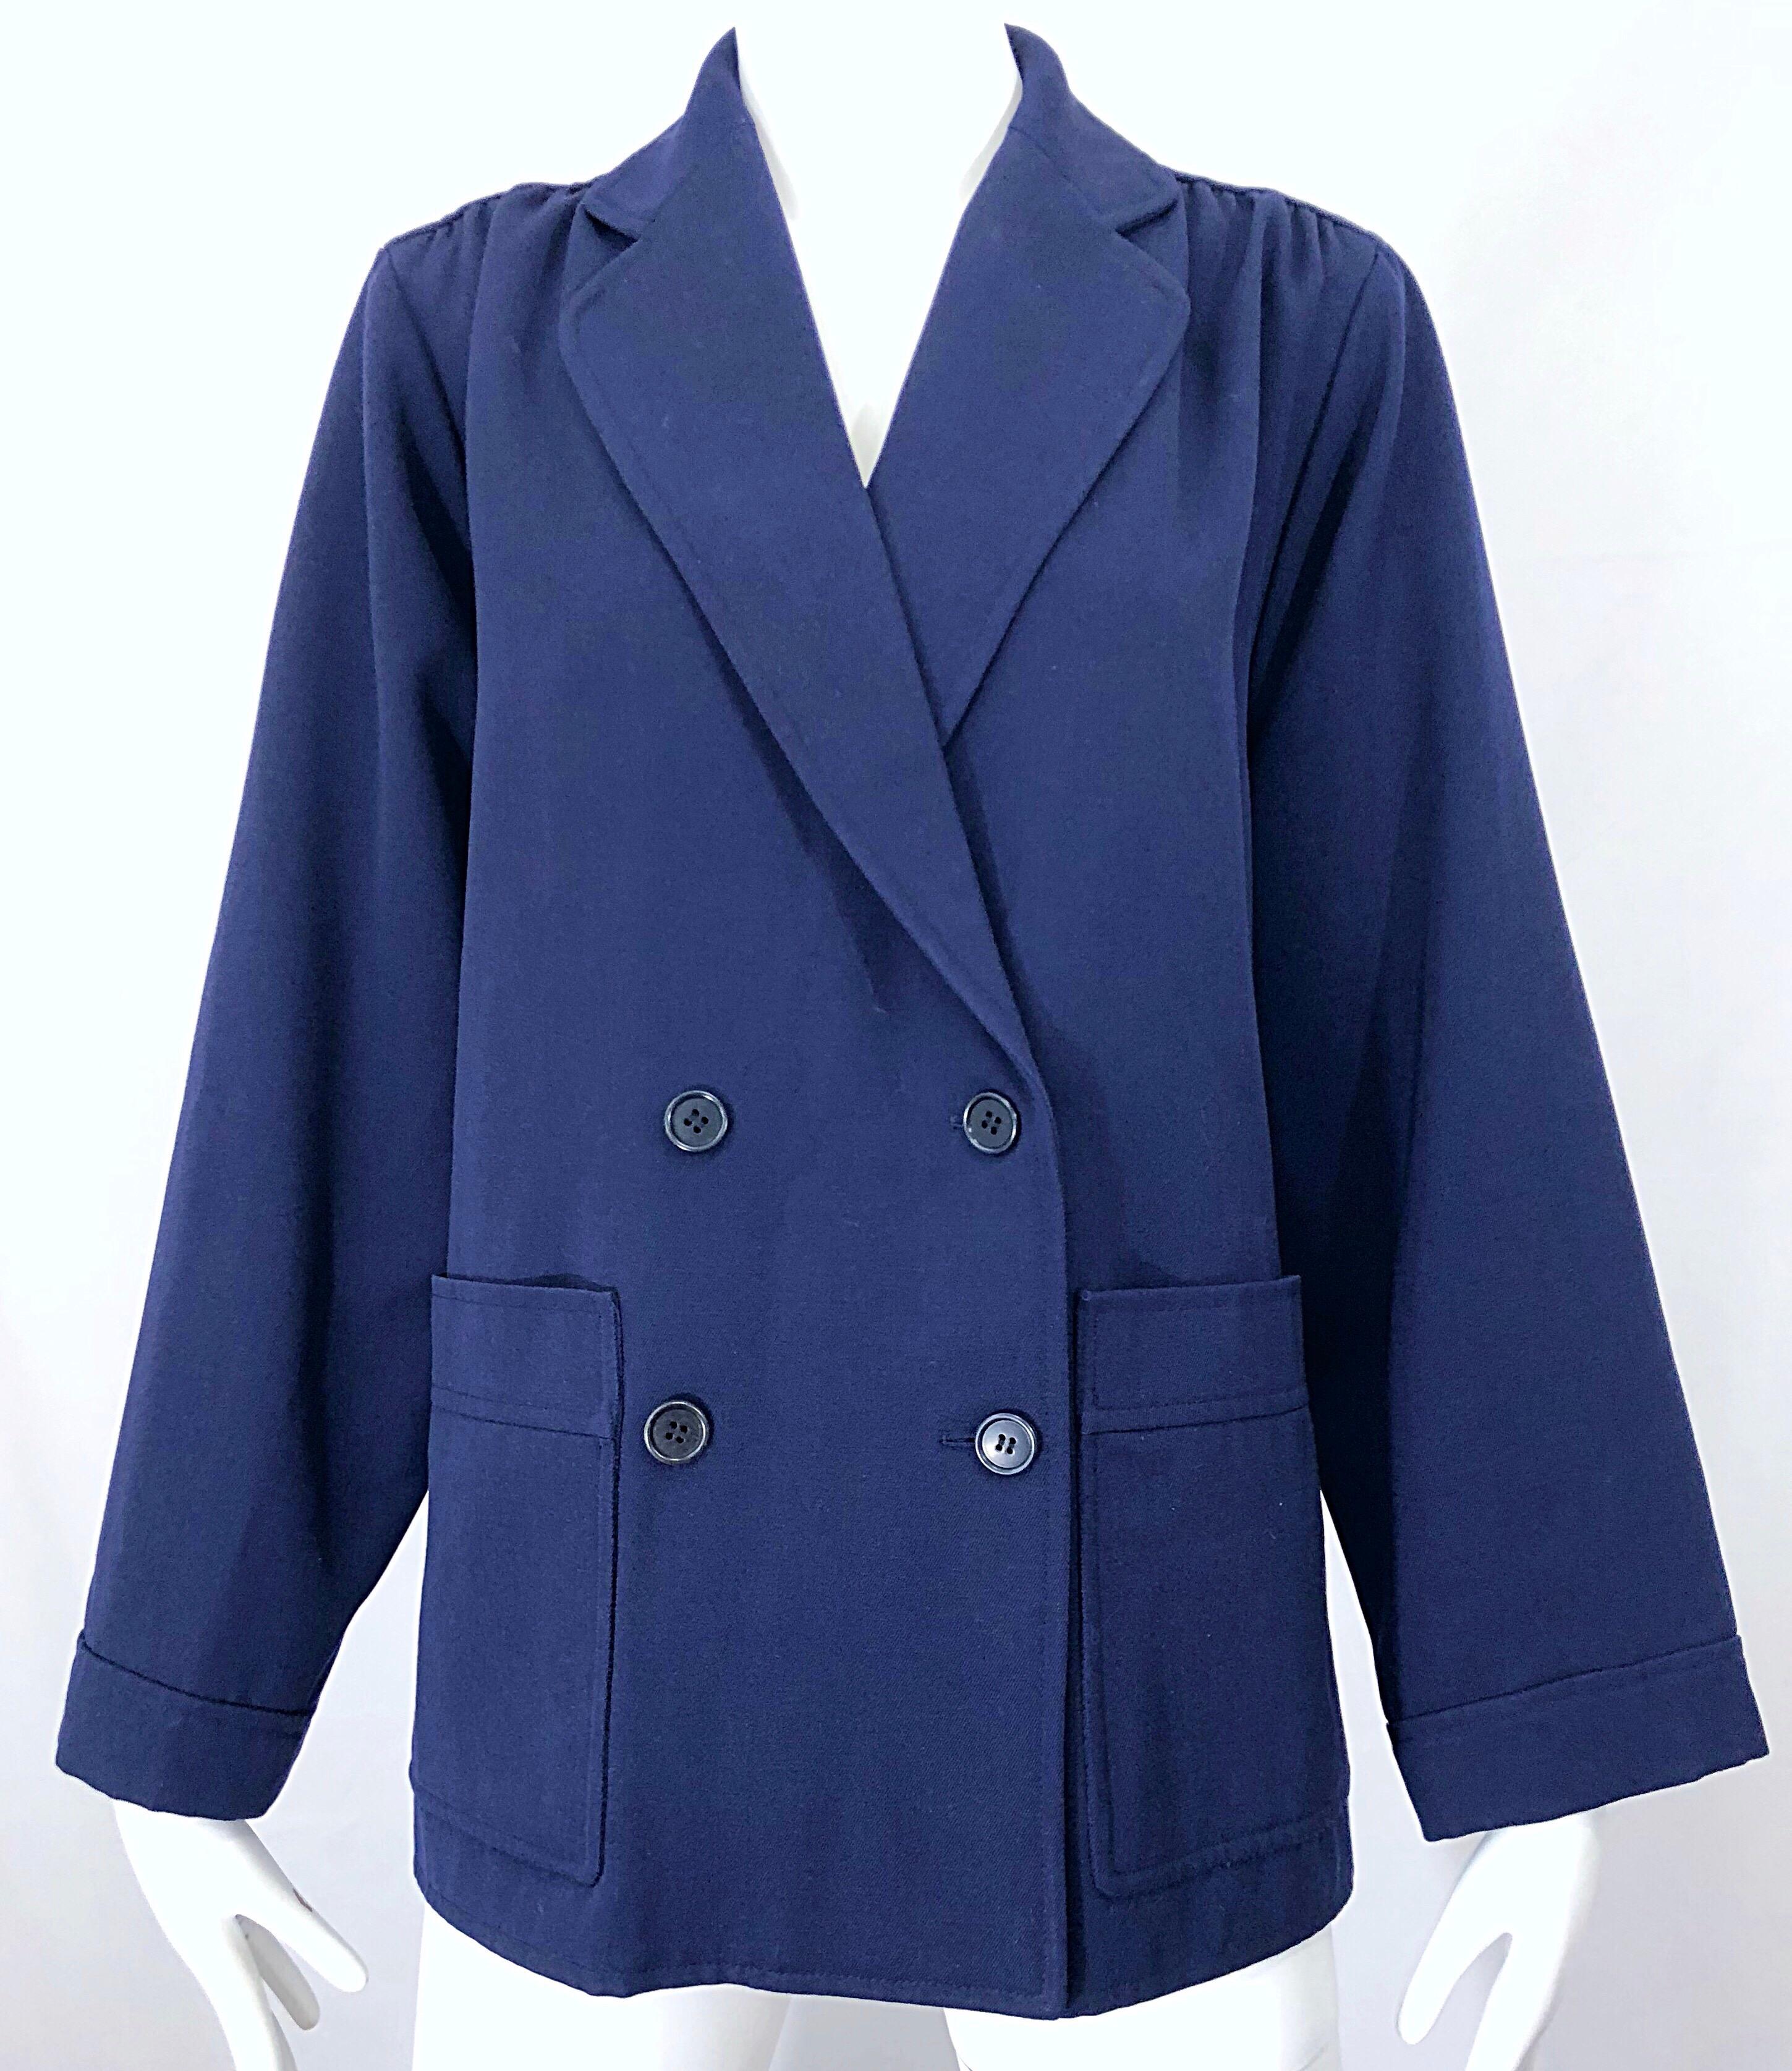 Chic 1960s Yves Saint Laurent Navy Blue Lightweight Wool Vintage Swing Jacket For Sale 3